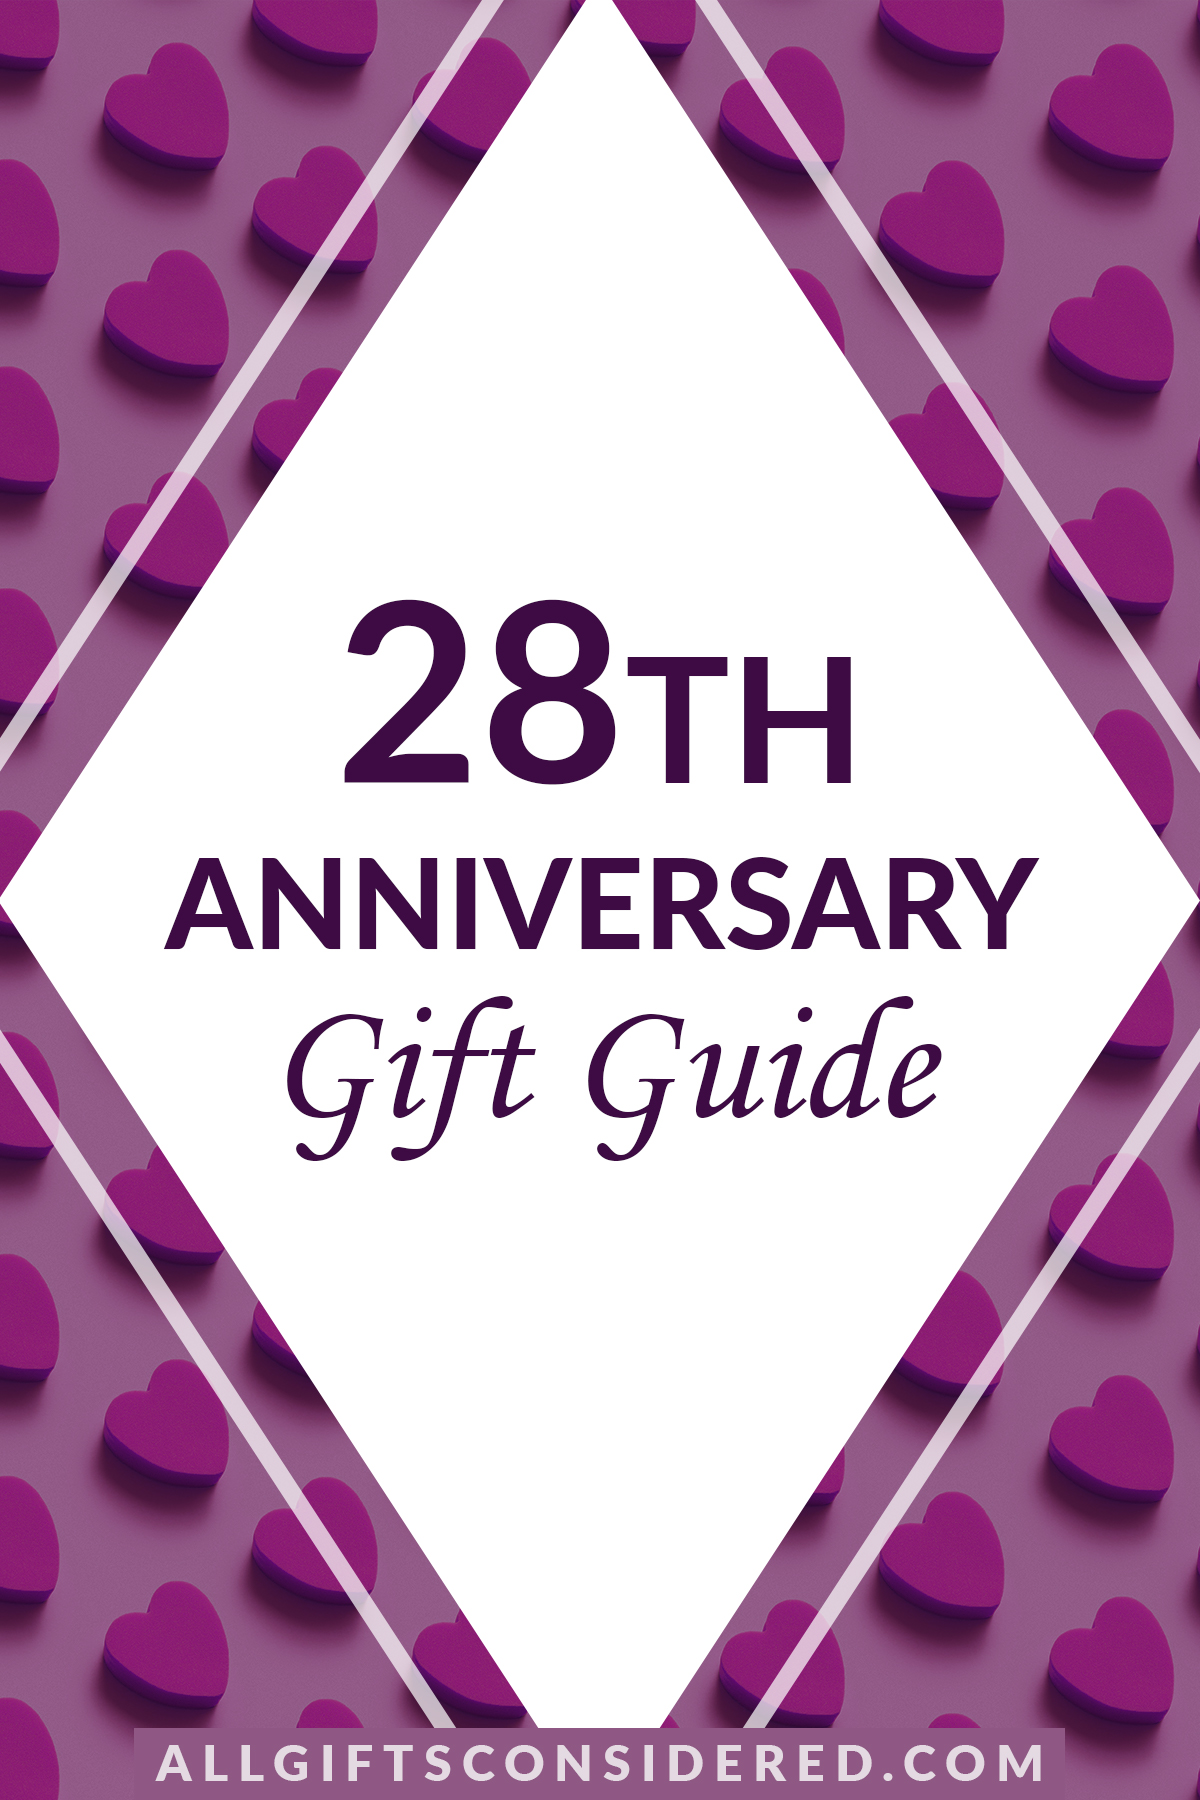 28th anniversary gifts - feature image